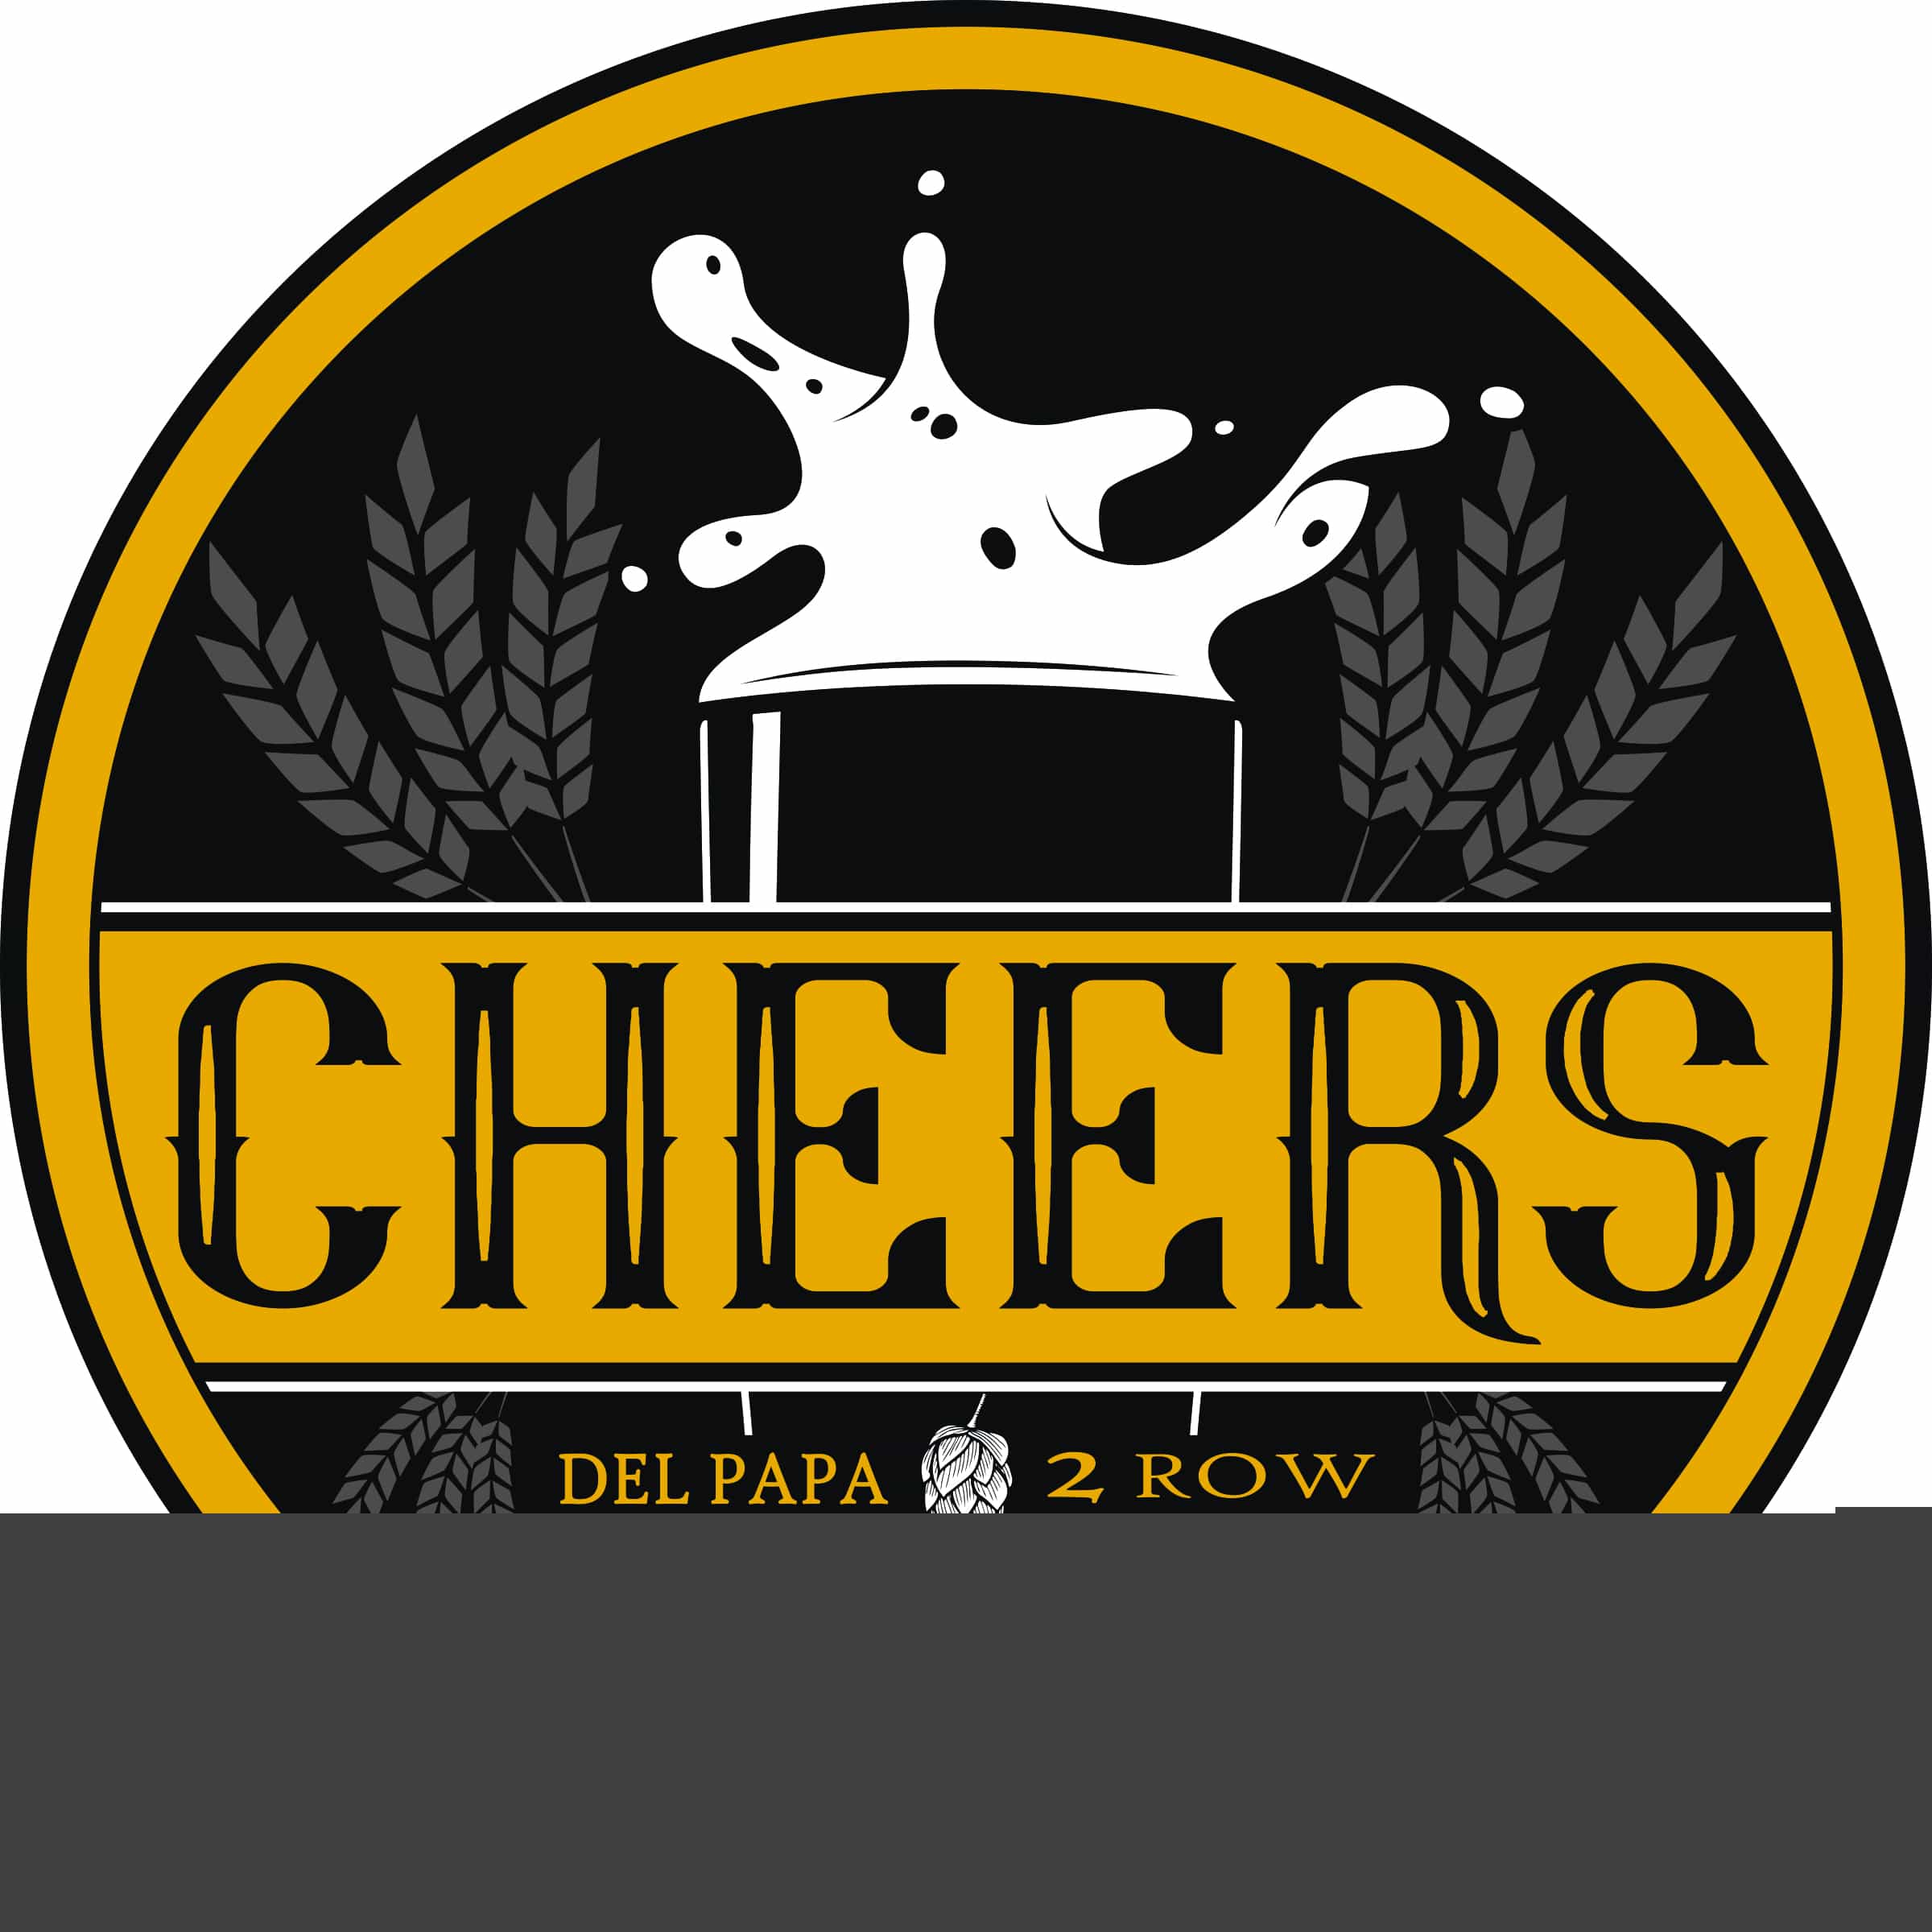 Del Papa Distributing Announces New “Cheers” Events